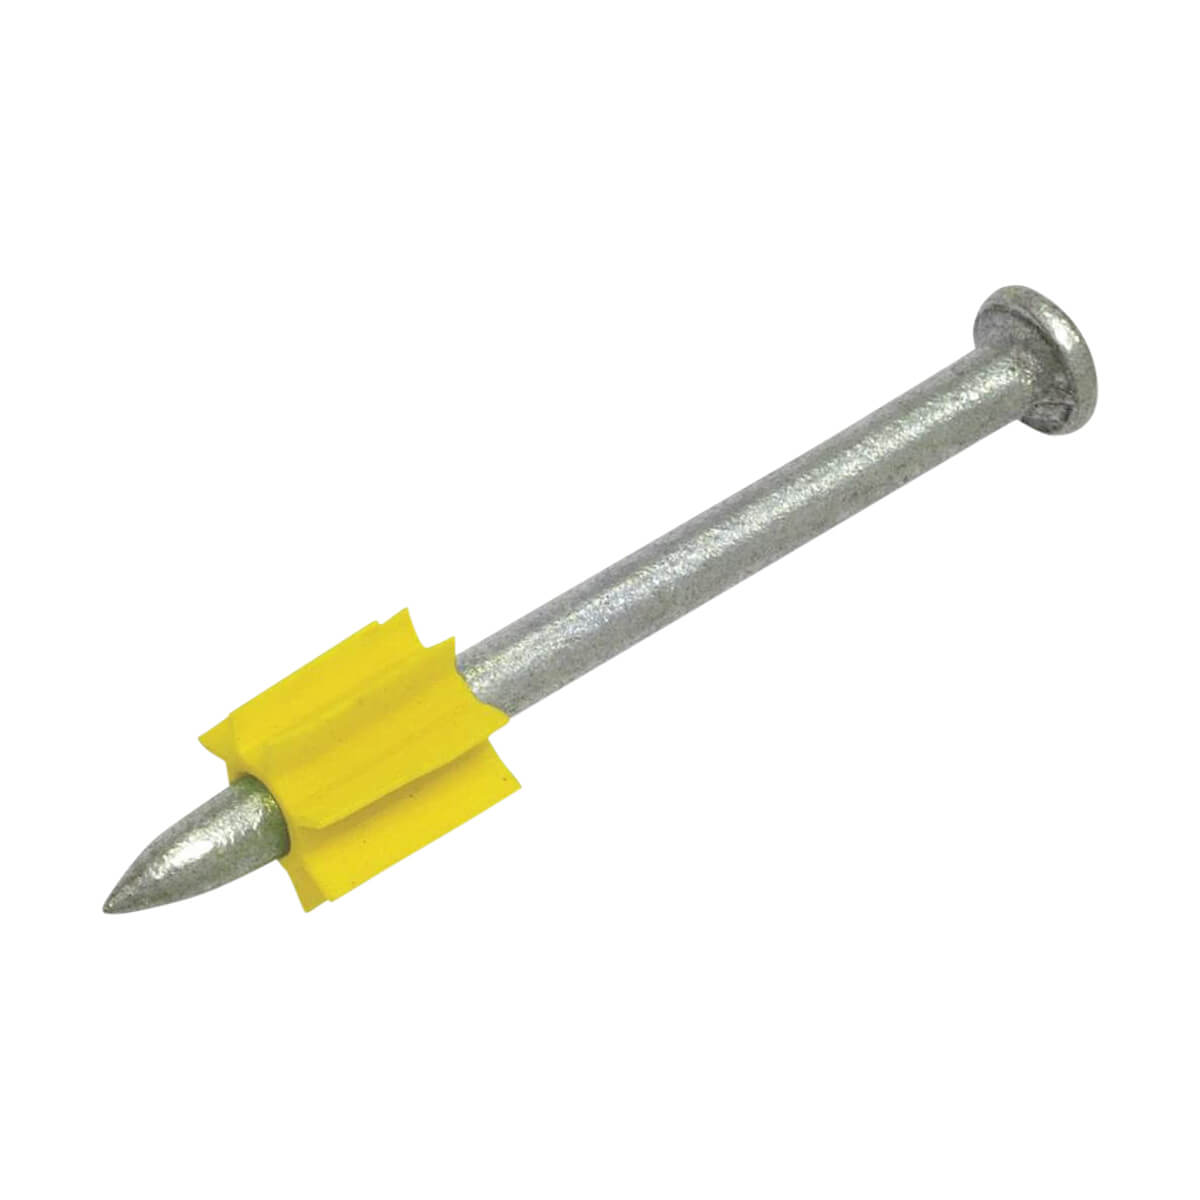 Powder Actuated Pins - 2-in - 100 Pack